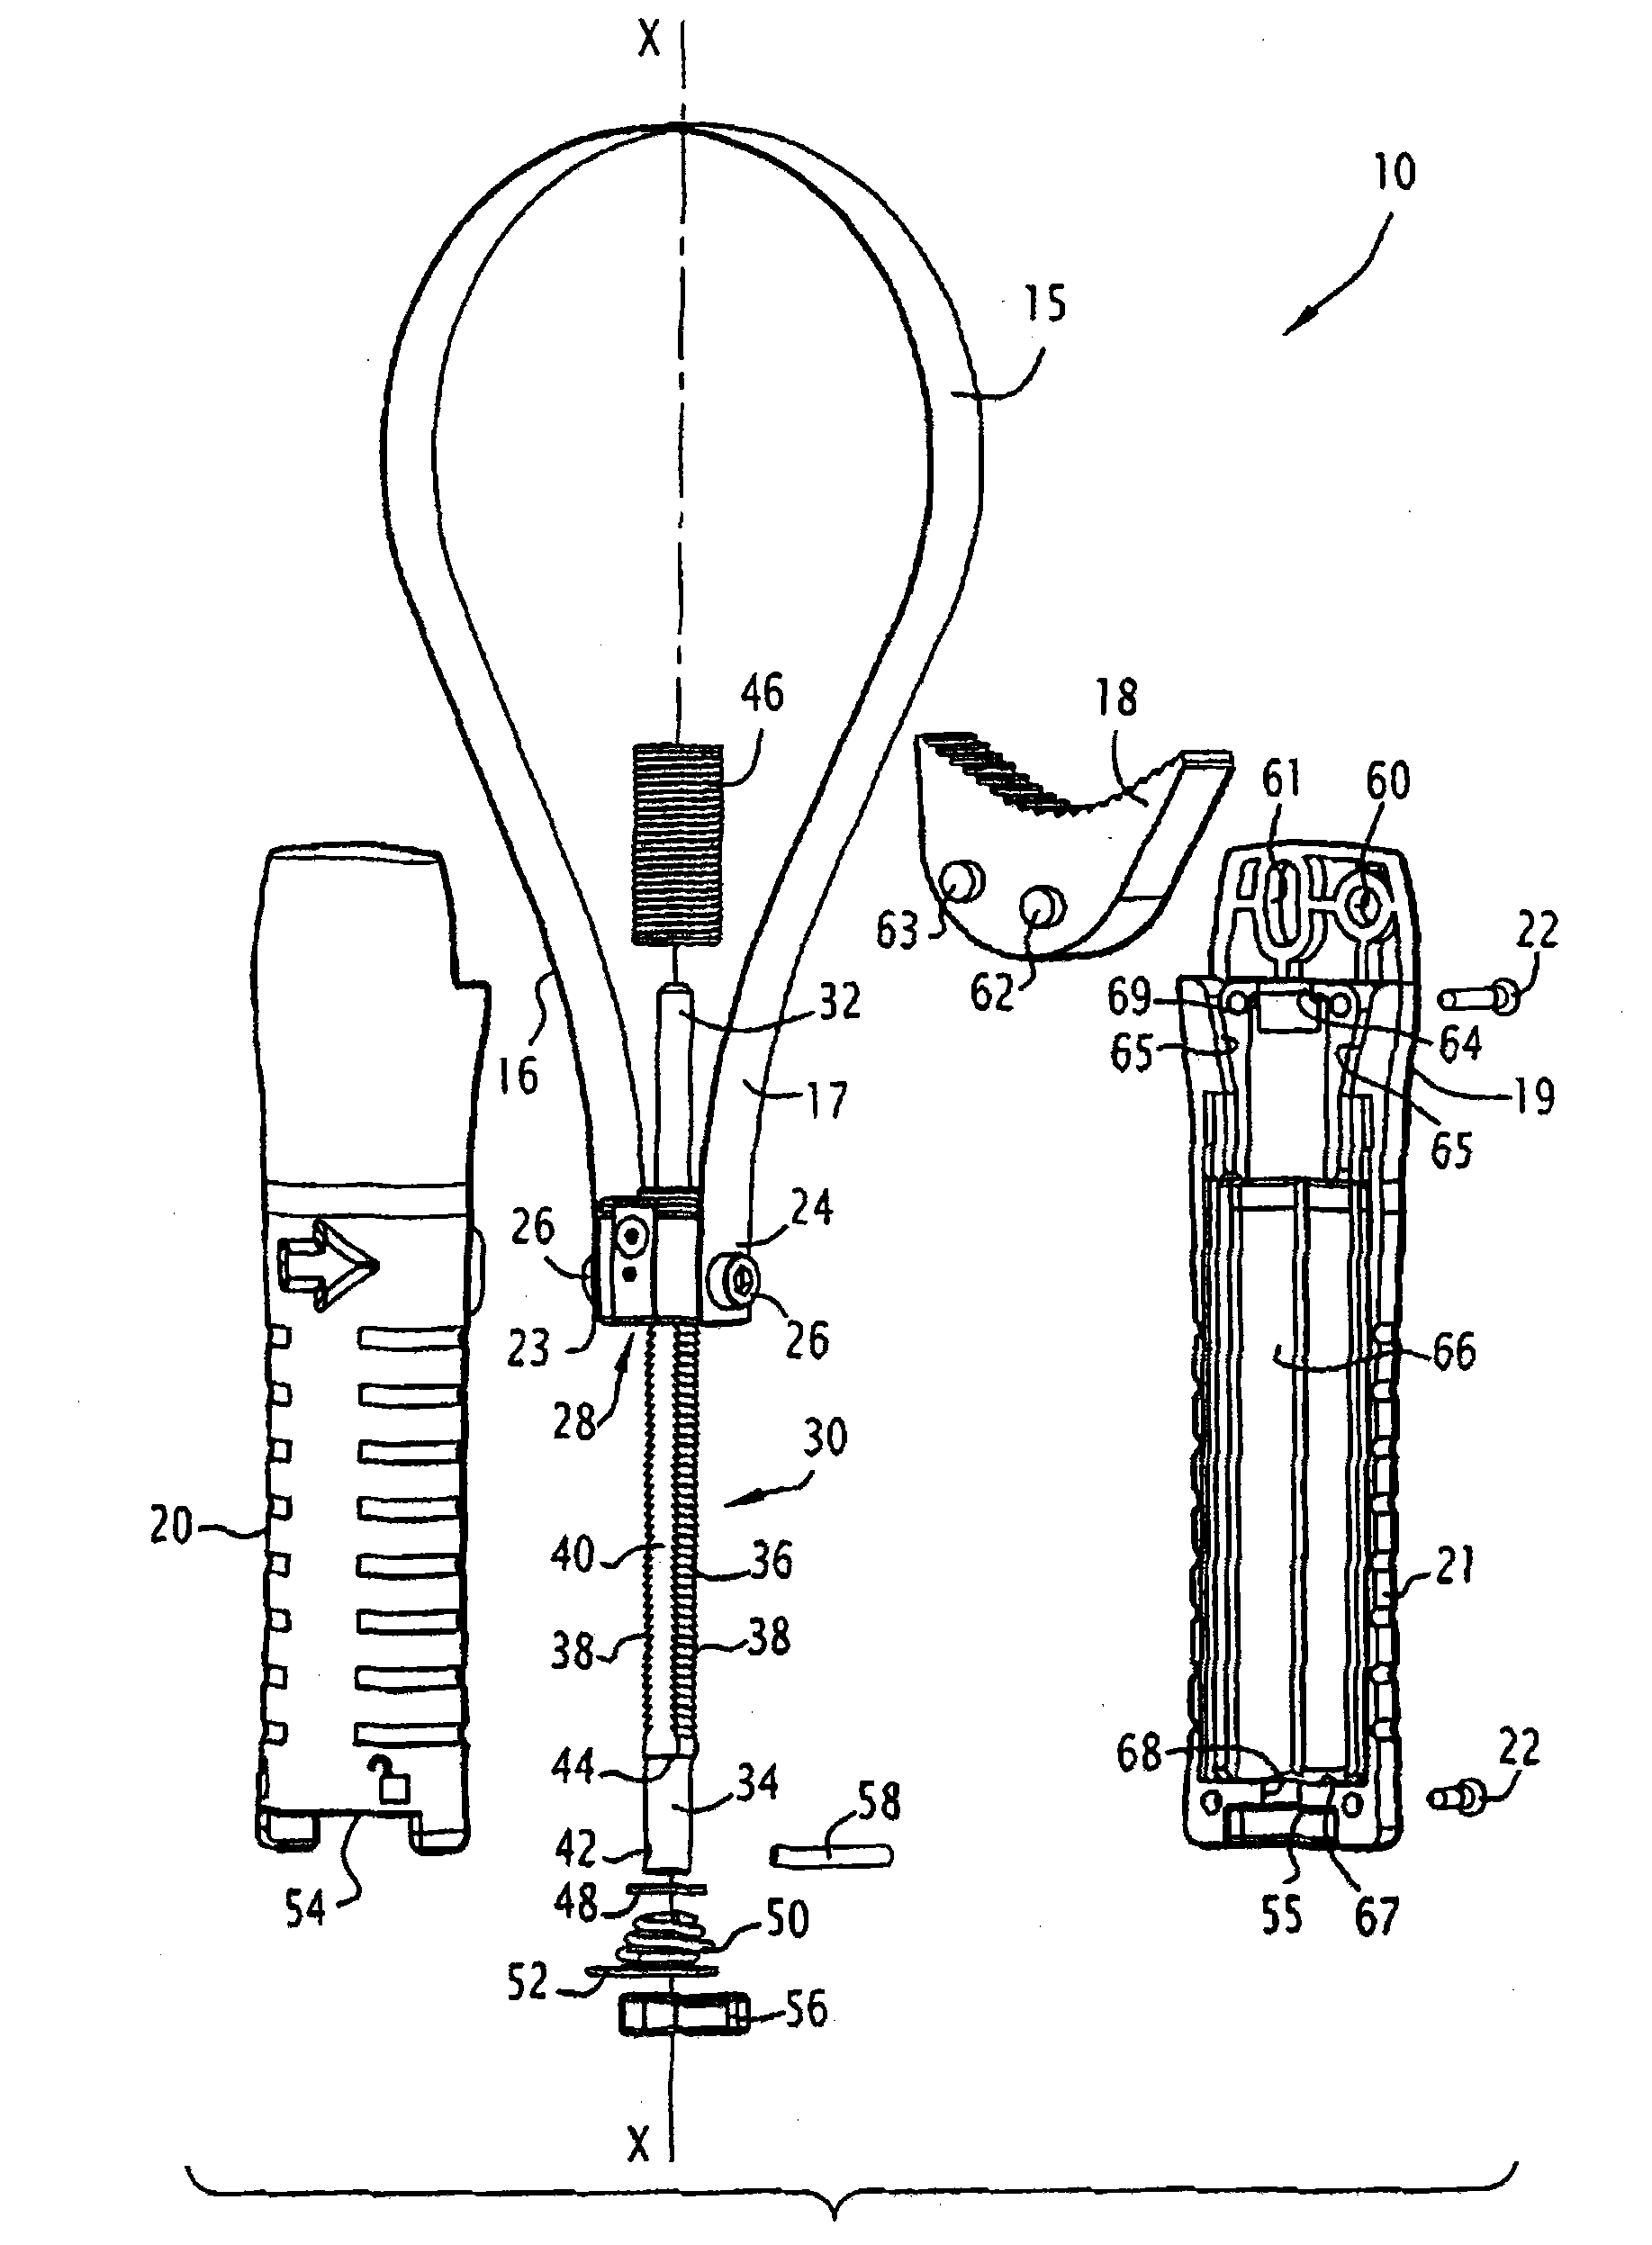 Advanced strap pipe wrench for driving an object having a generally cylindrical shape